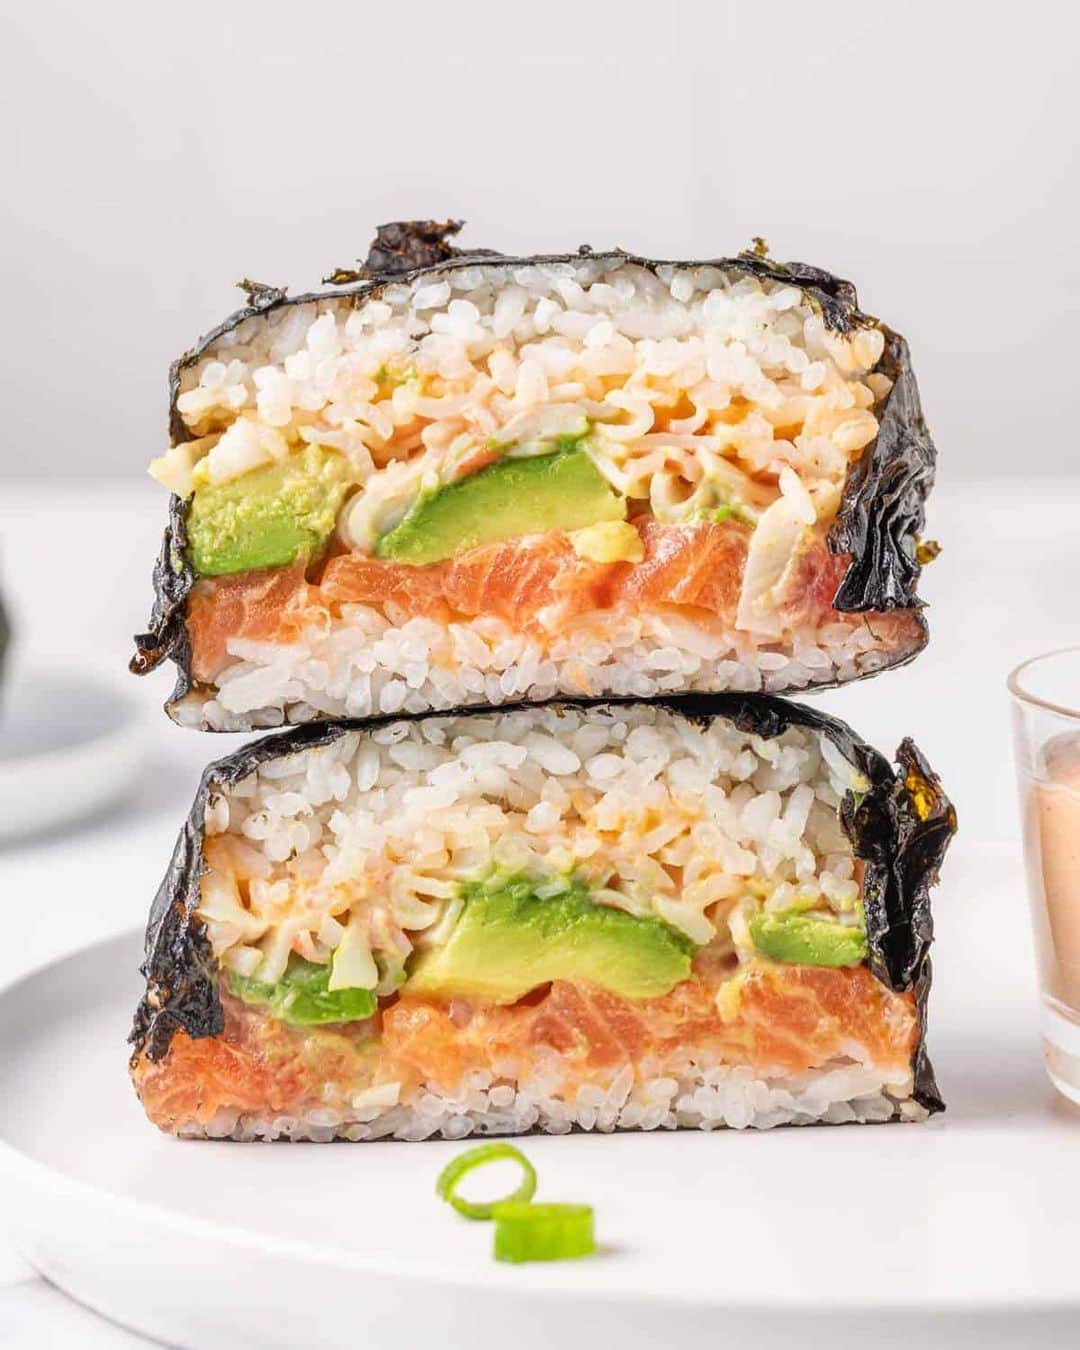 Easy Recipesのインスタグラム：「This easy Sushi Burger has layers of spicy salmon, crab and avocado held together with a rice bun and nori wraps. It has all the flavor and texture of your favorite sushi roll but is shaped like a burger. Try it!  Full recipe link in my bio @cookinwithmima  https://www.cookinwithmima.com/sushi-burger/」